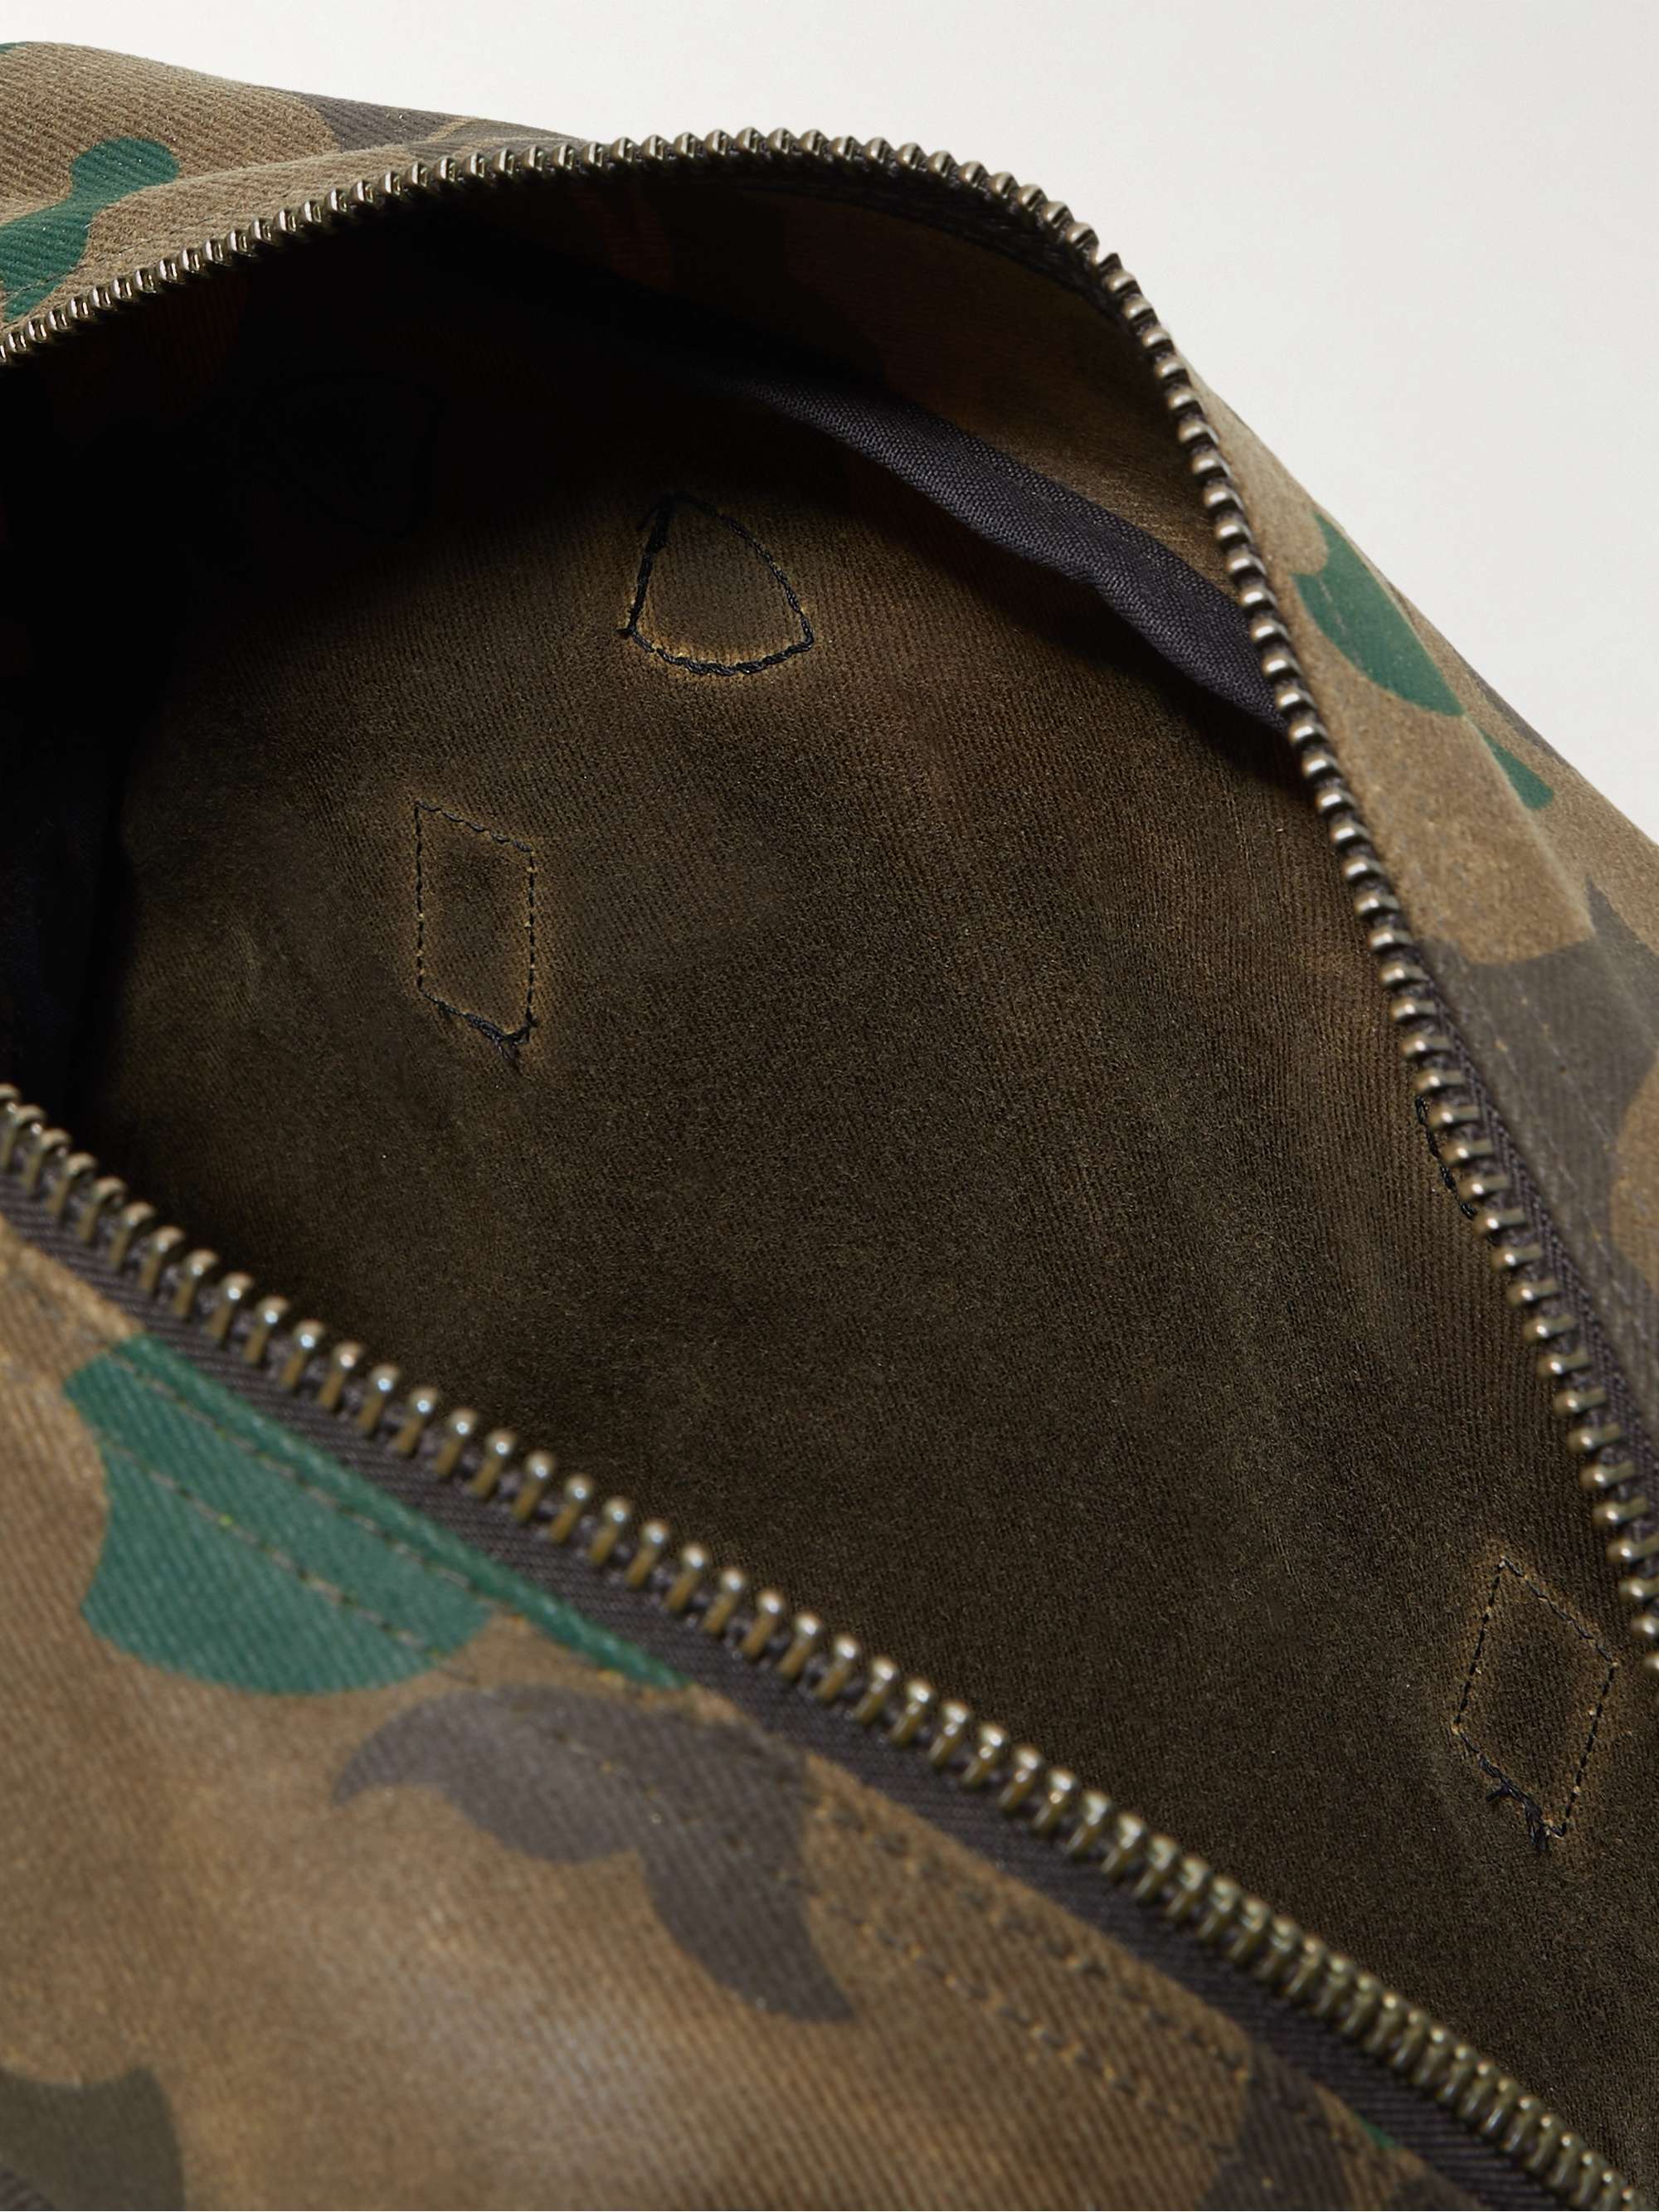 FILSON Leather-Trimmed Camouflage-Print Waxed Rugged Twill Tote Bag